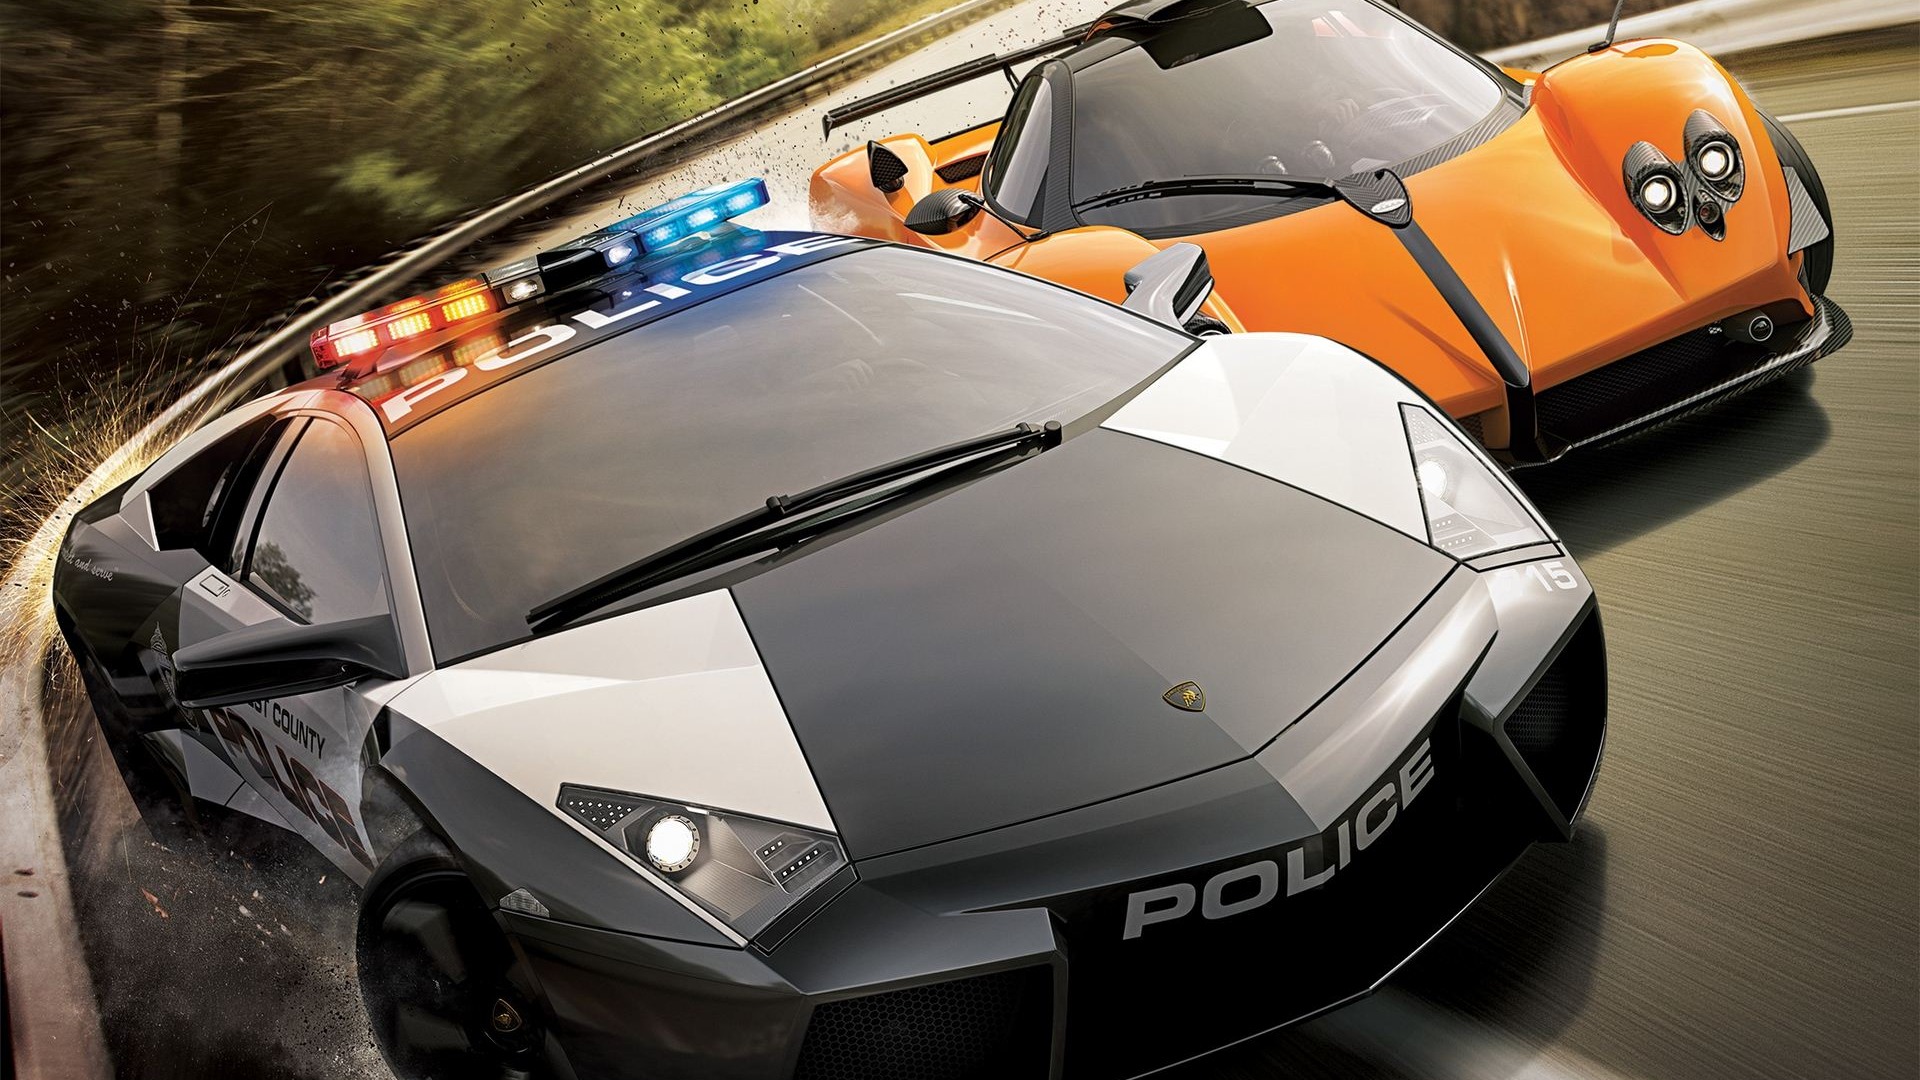 Need for Speed: Hot Pursuit 极品飞车14：热力追踪3 - 1920x1080